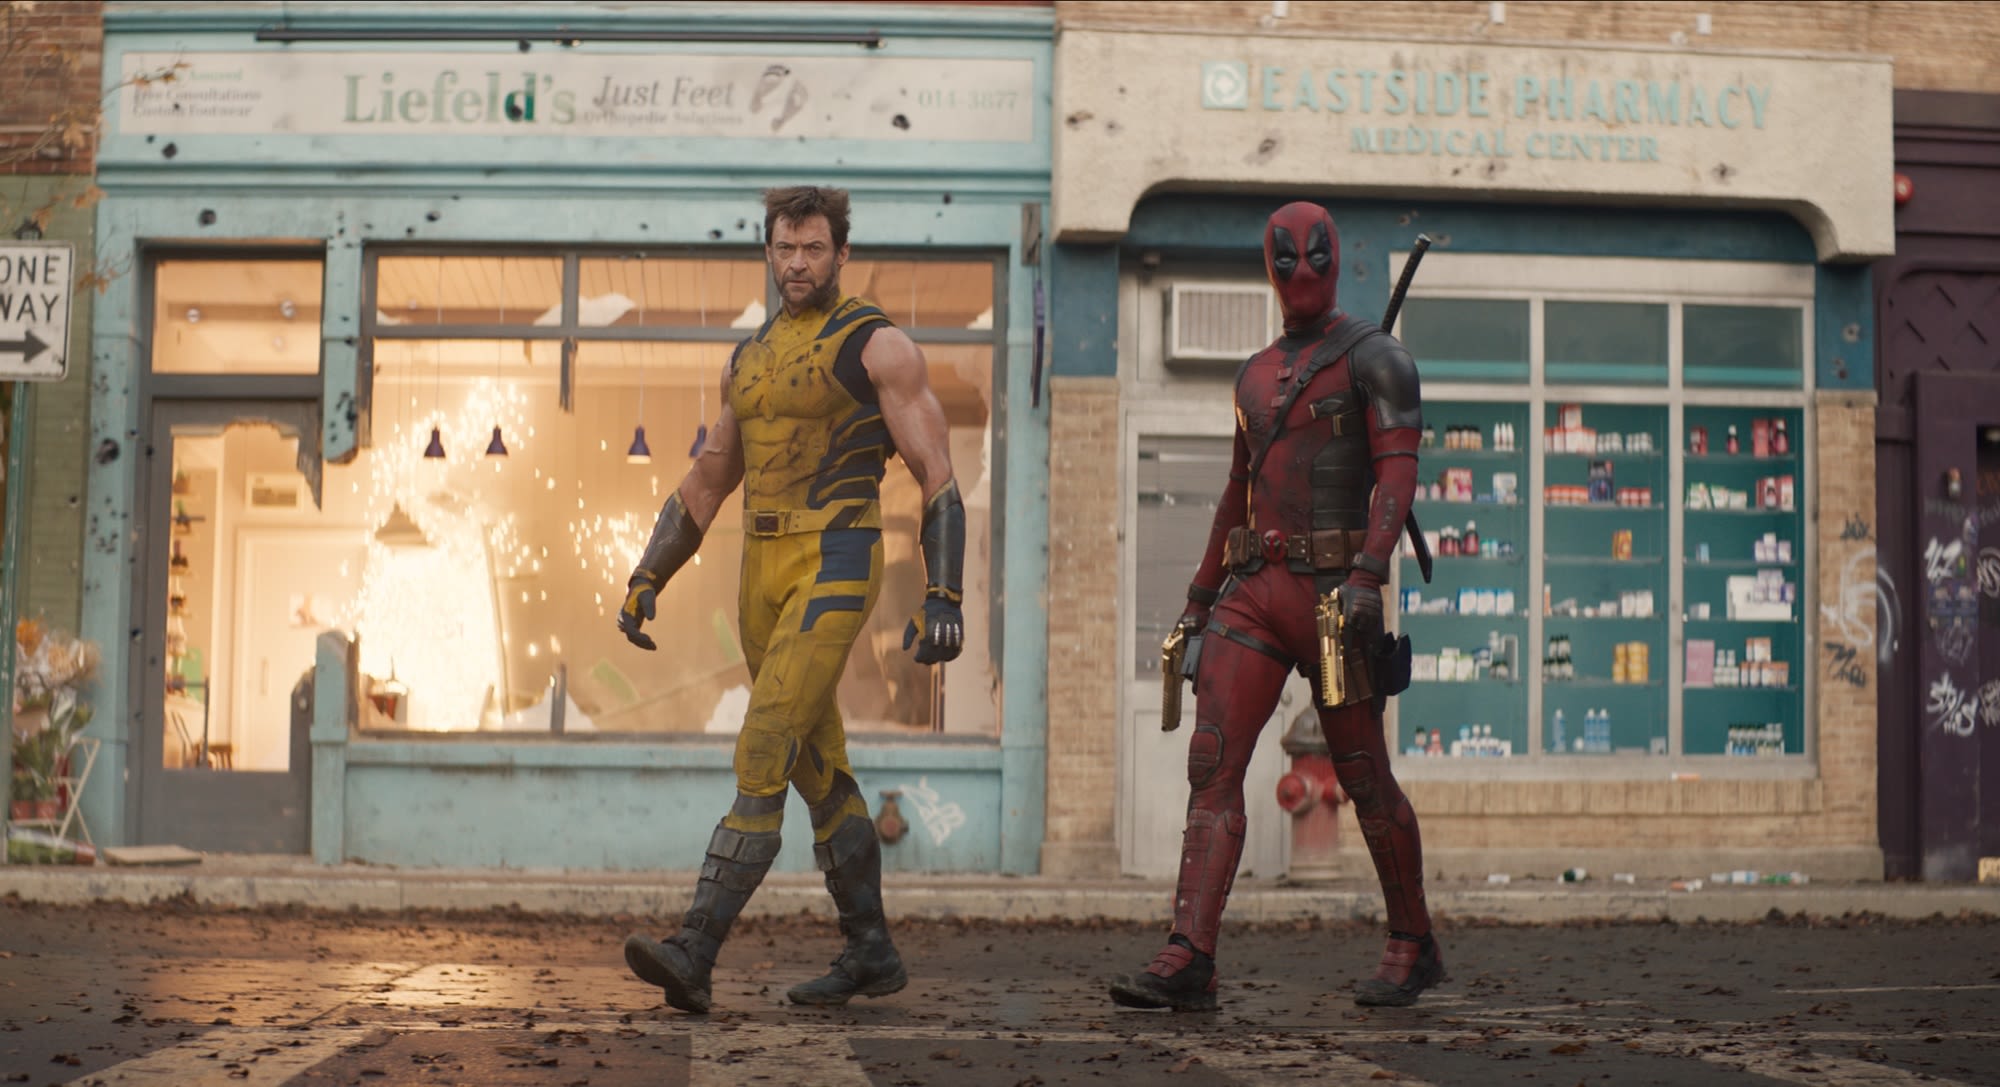 Deadpool & Wolverine has a few plot holes we need to talk about